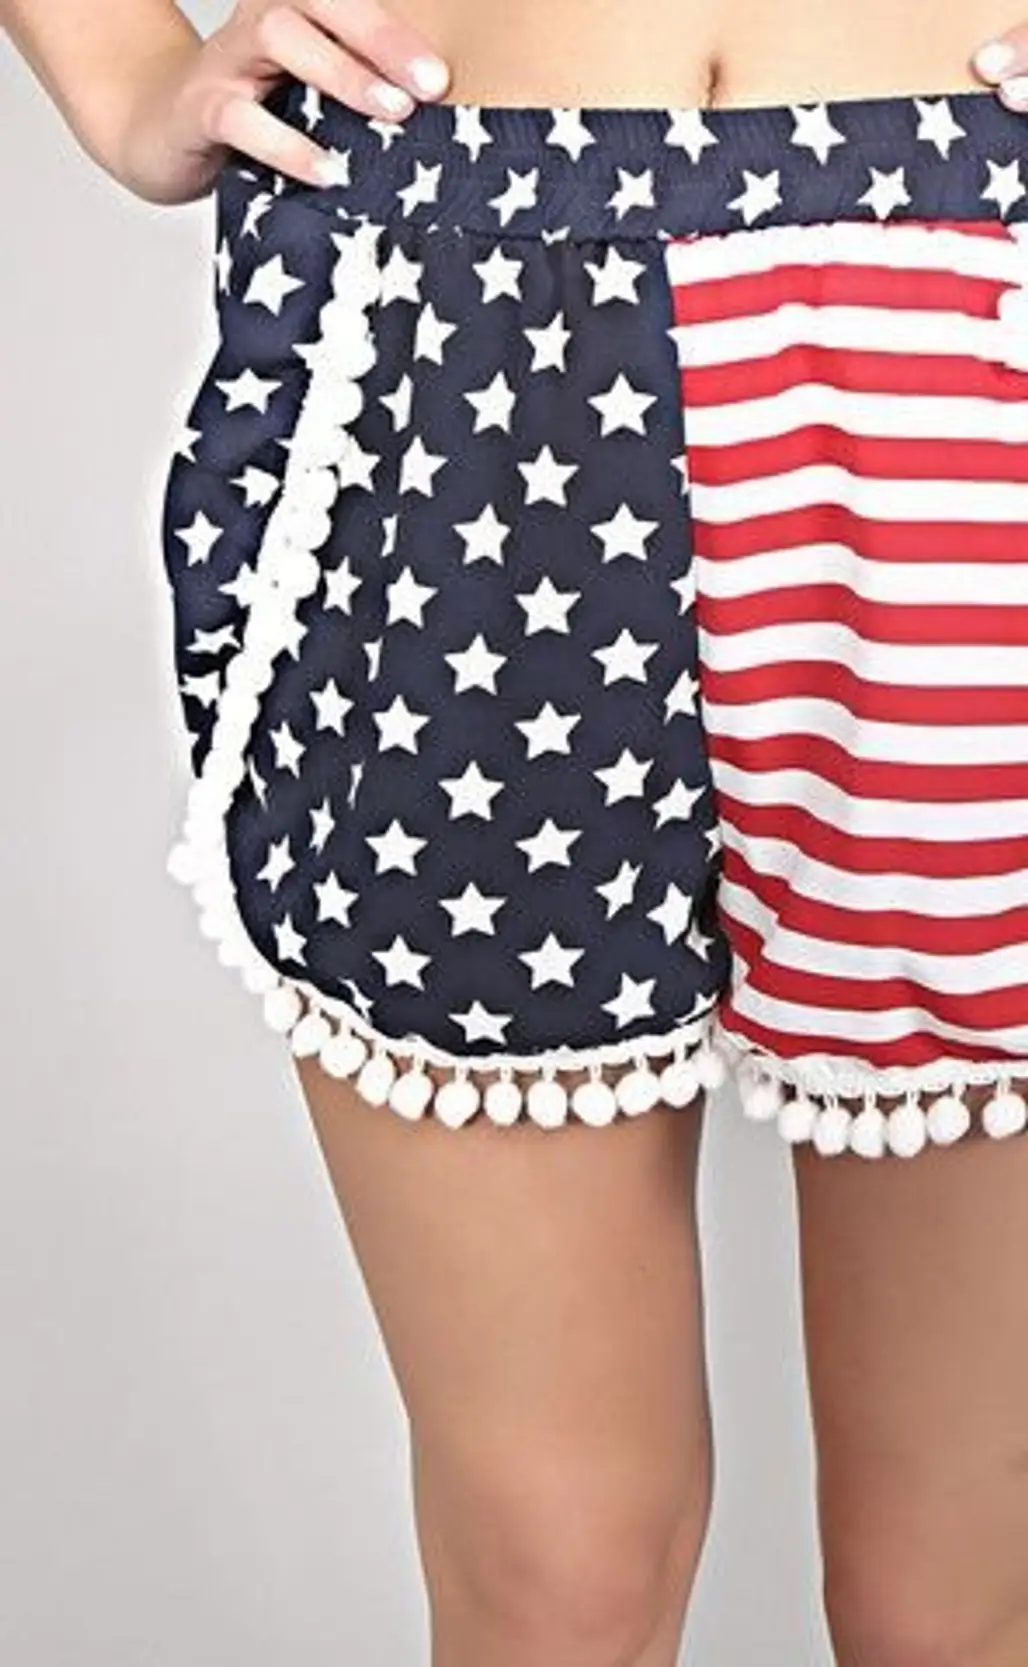 Ways to Wear Your American Spirit This 4th July ...